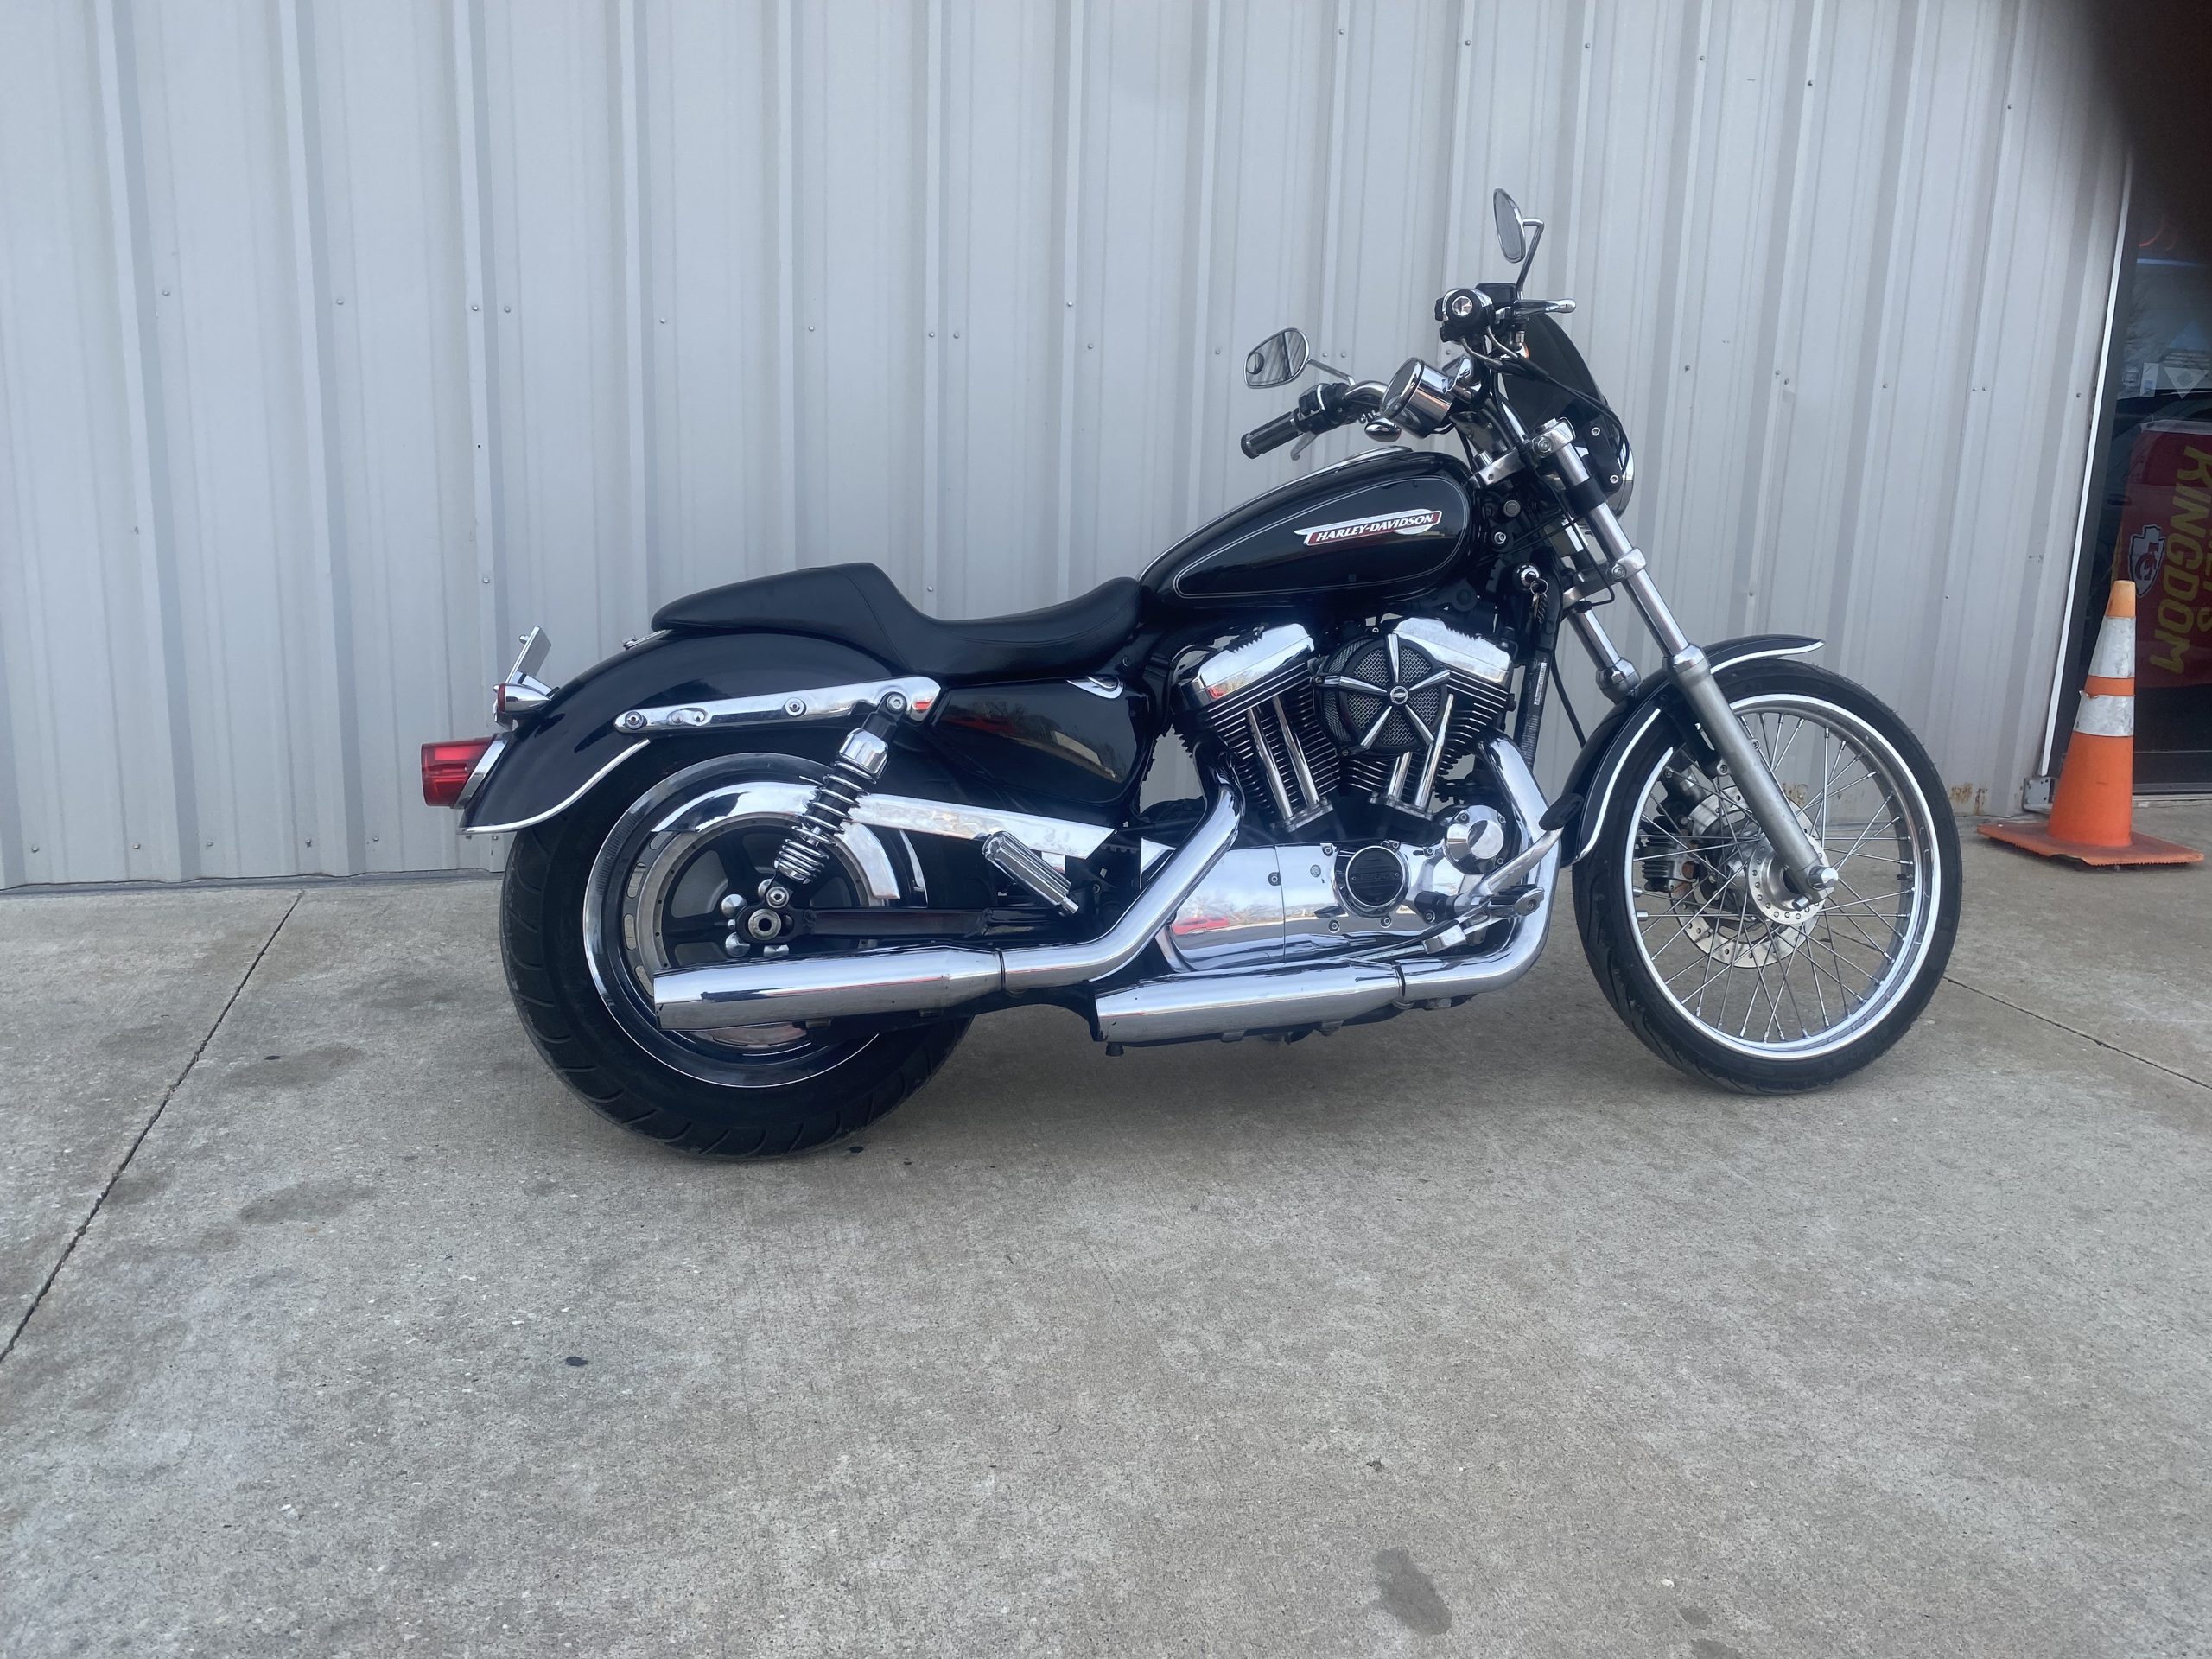 Used Harley Davidson For Sale, Rare Find: Used 2008 Harley Davidson 1200C Sportster in Vivid Black for Sale at Knobtown Cycle &#8211; Only $5,500!, Knobtown Cycle